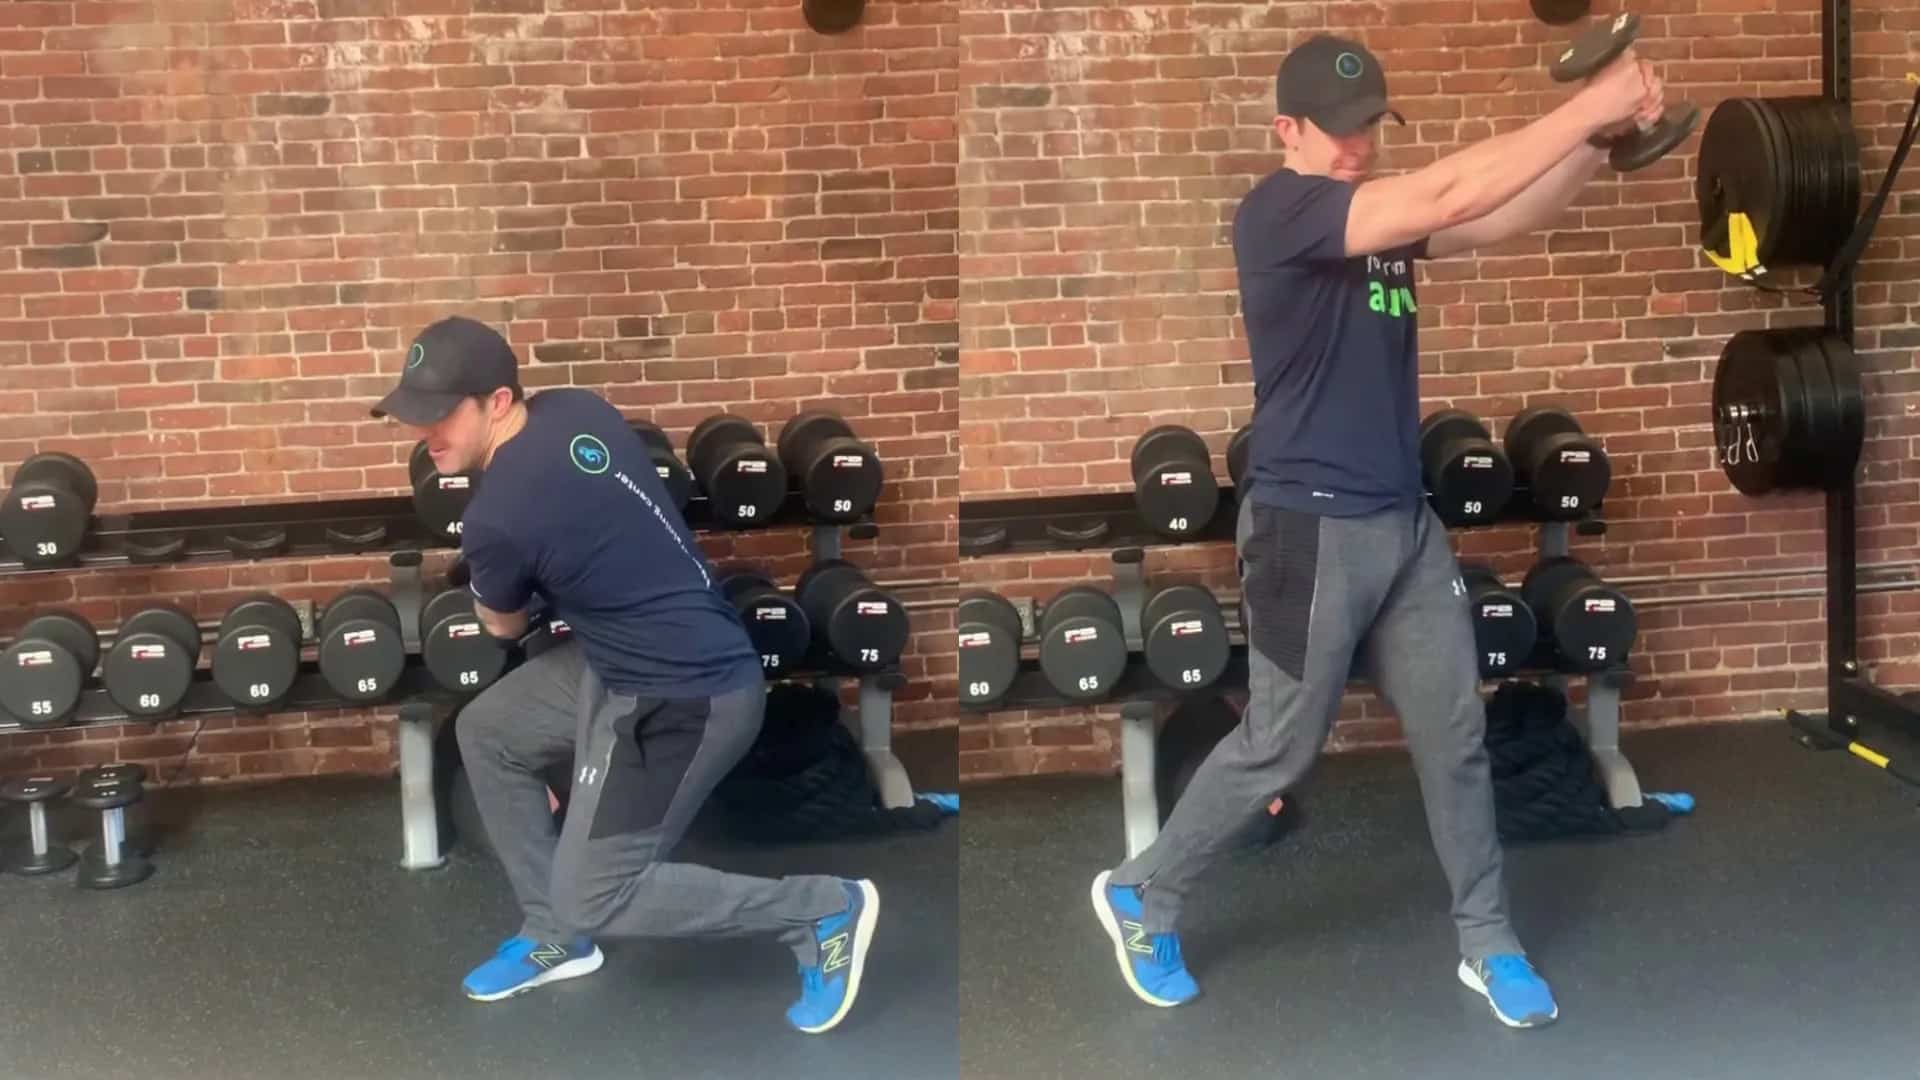 Dumbbell Down-Up twist